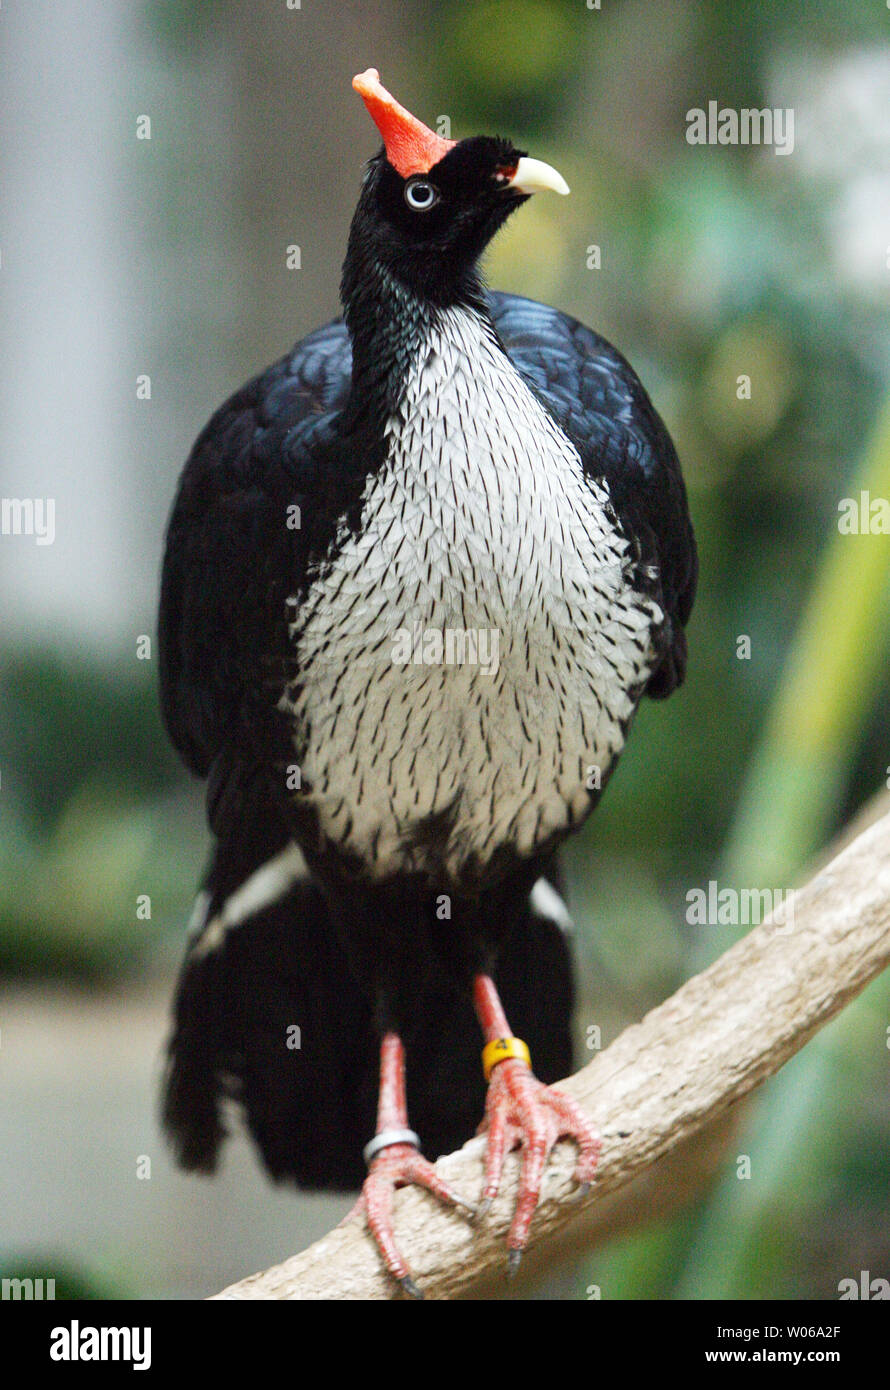 A female horned guan looks around her new cage at the St. Louis Zoo in St. Louis on January 17, 2007. A two-year-old female and a three-year-old male are now on display and are the first-ever horned guans in a U.S. zoo. The birds can be found in the mountain forests of southeastern Mexico and Guatemala. Population estimates report less than 1000 guans left in the wild because of habitat destruction and hunting. (UPI Photo/Bill Greenblatt) Stock Photo